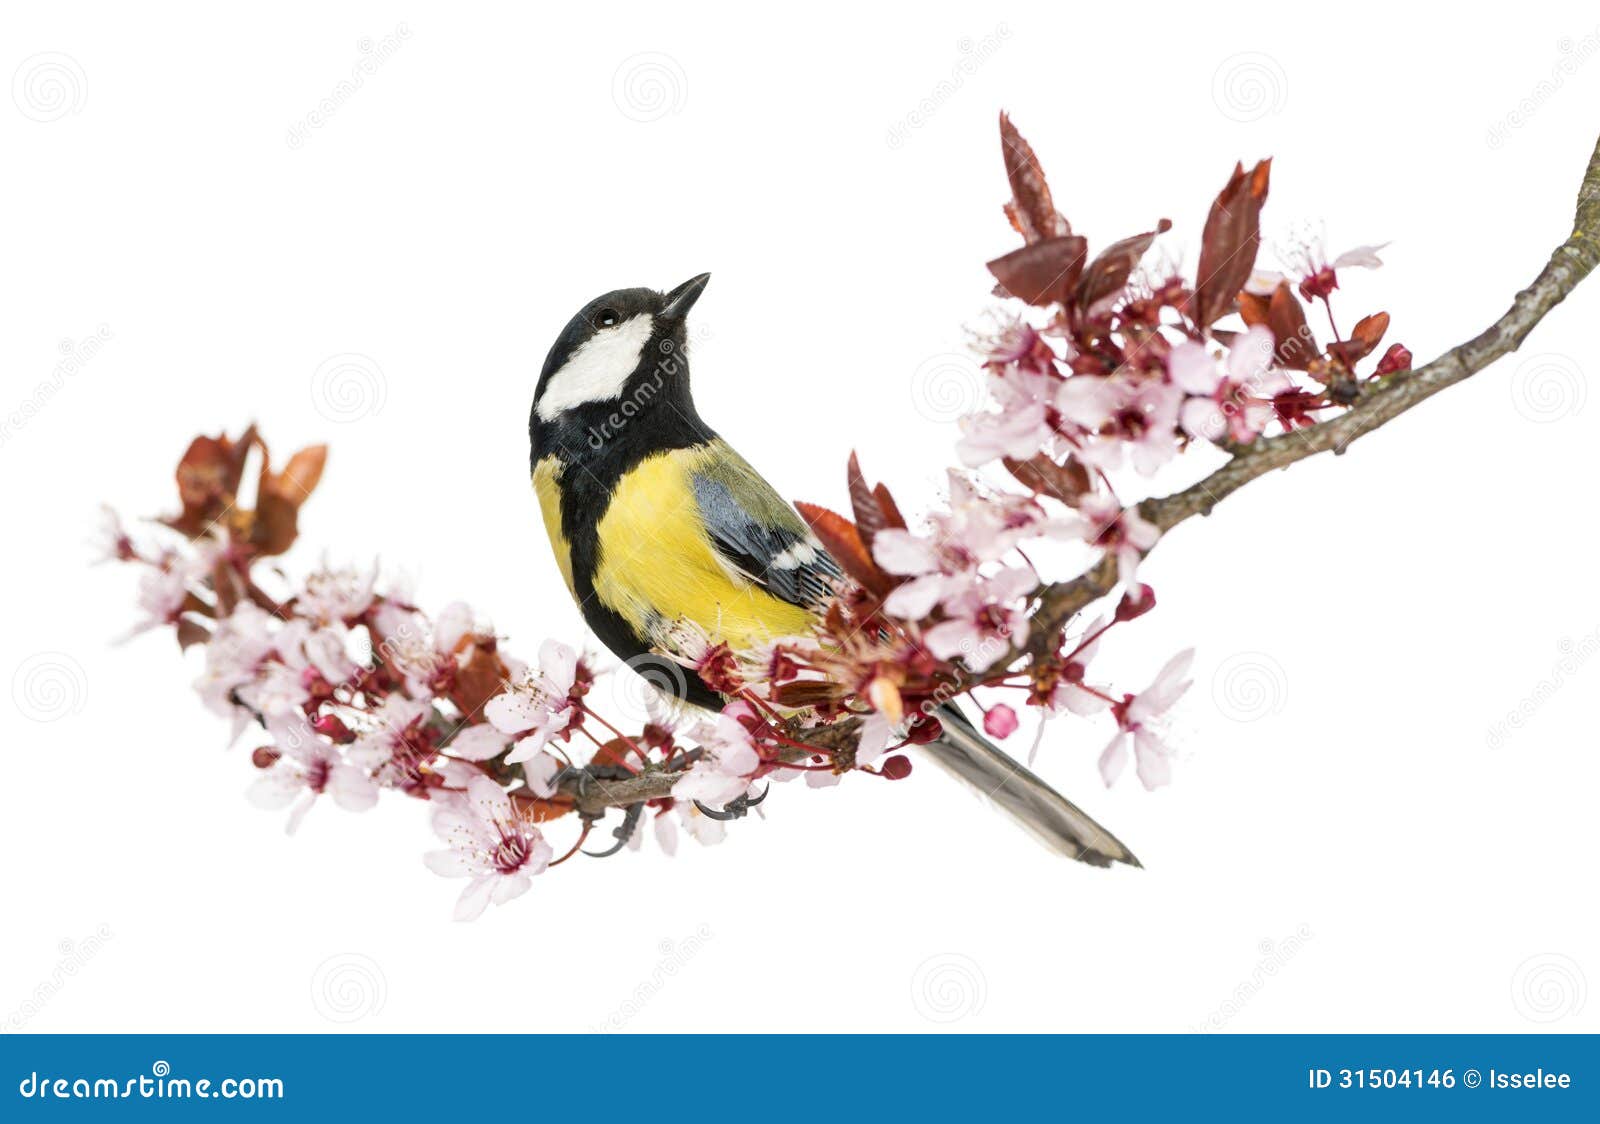 male great tit looking up, perched on a flowering branch